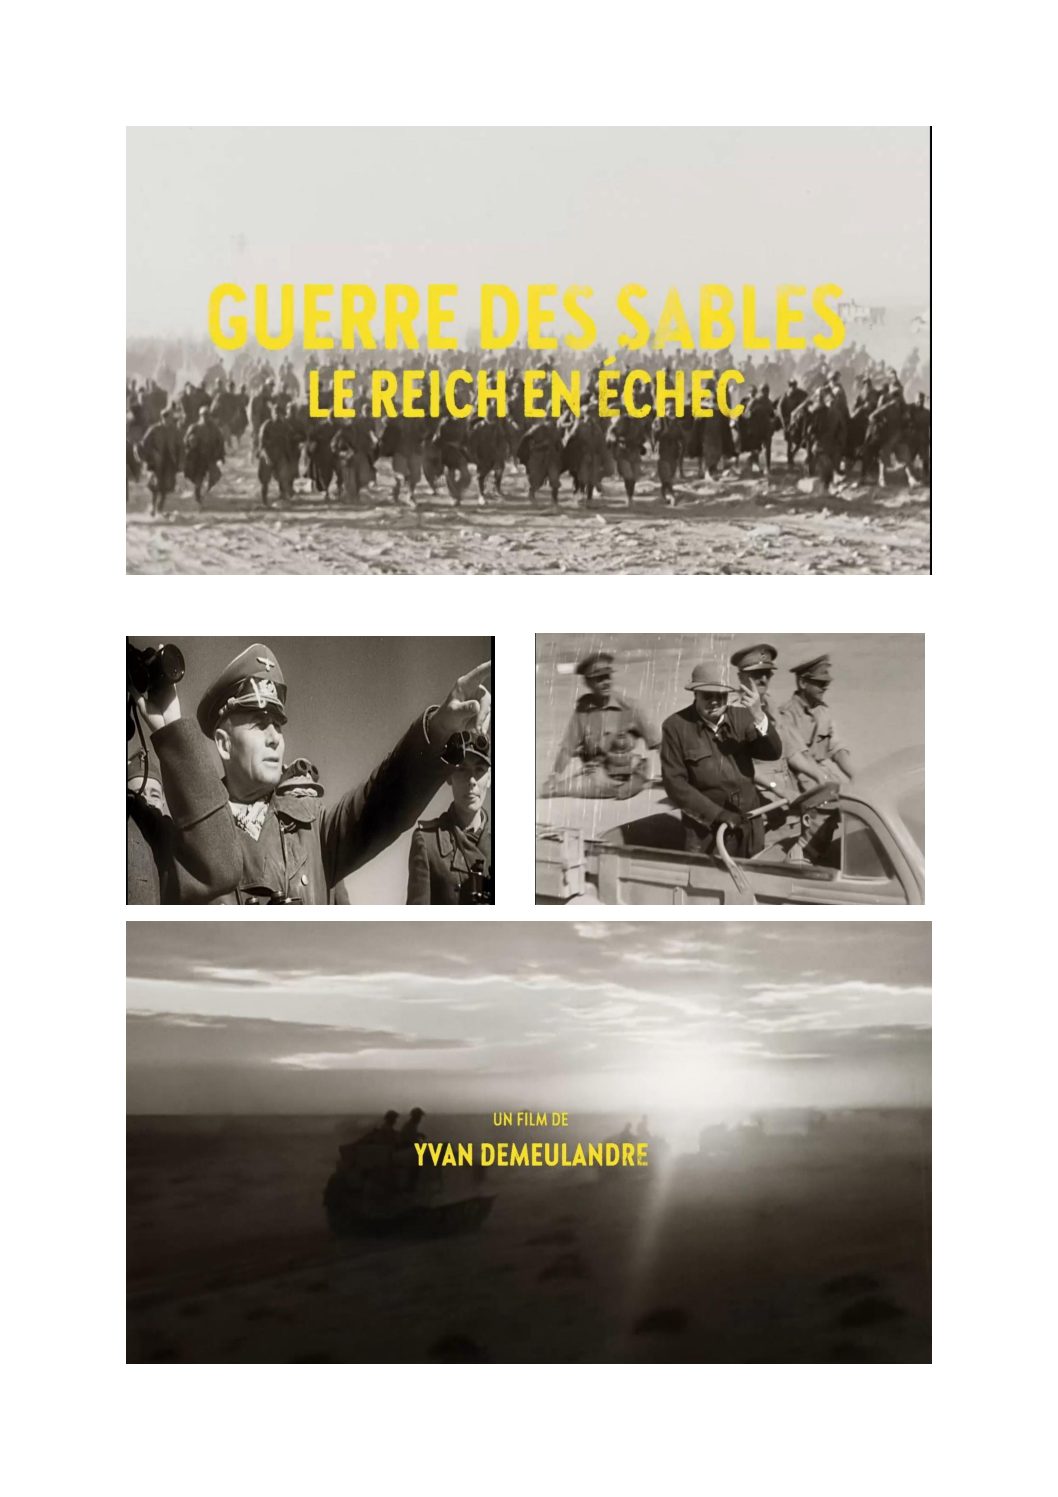 You are currently viewing Diffusion La guerre des Sables d’Yvan Demeulandre France3